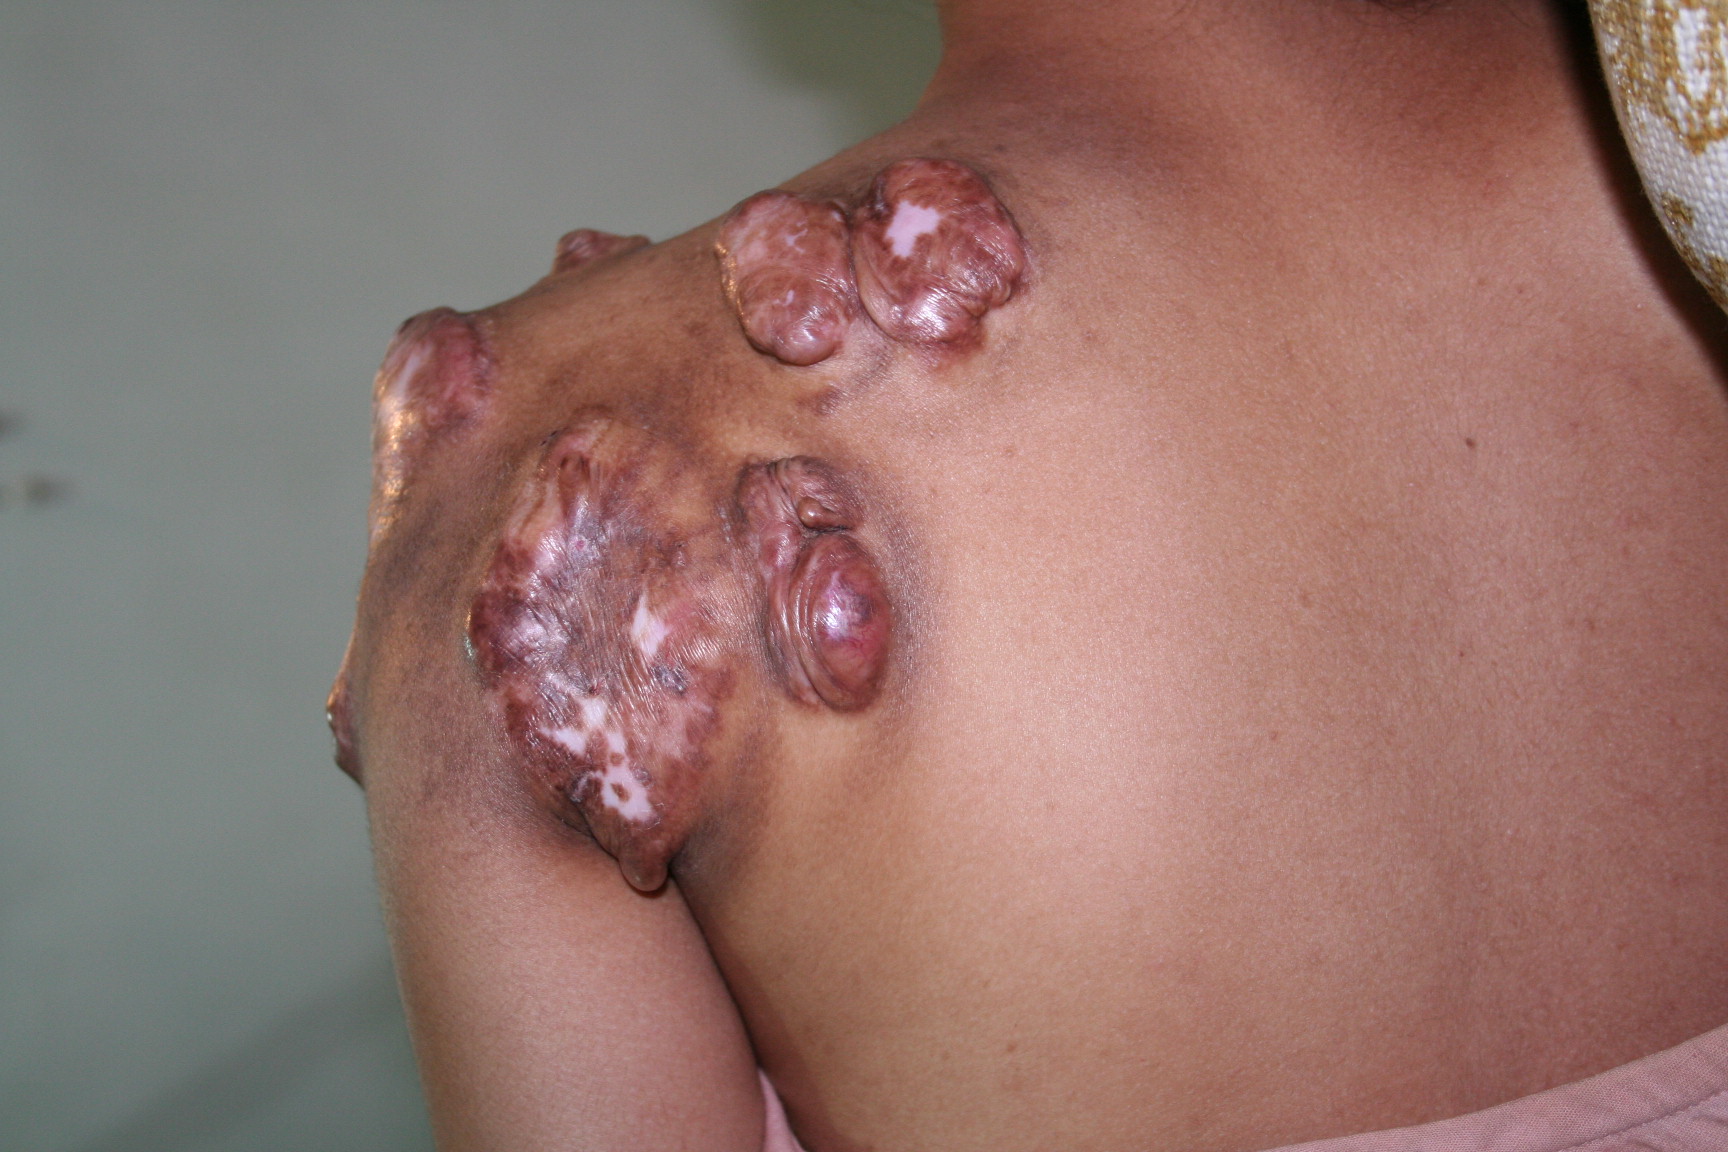 Keloid scarring - Live Well - NHS Choices